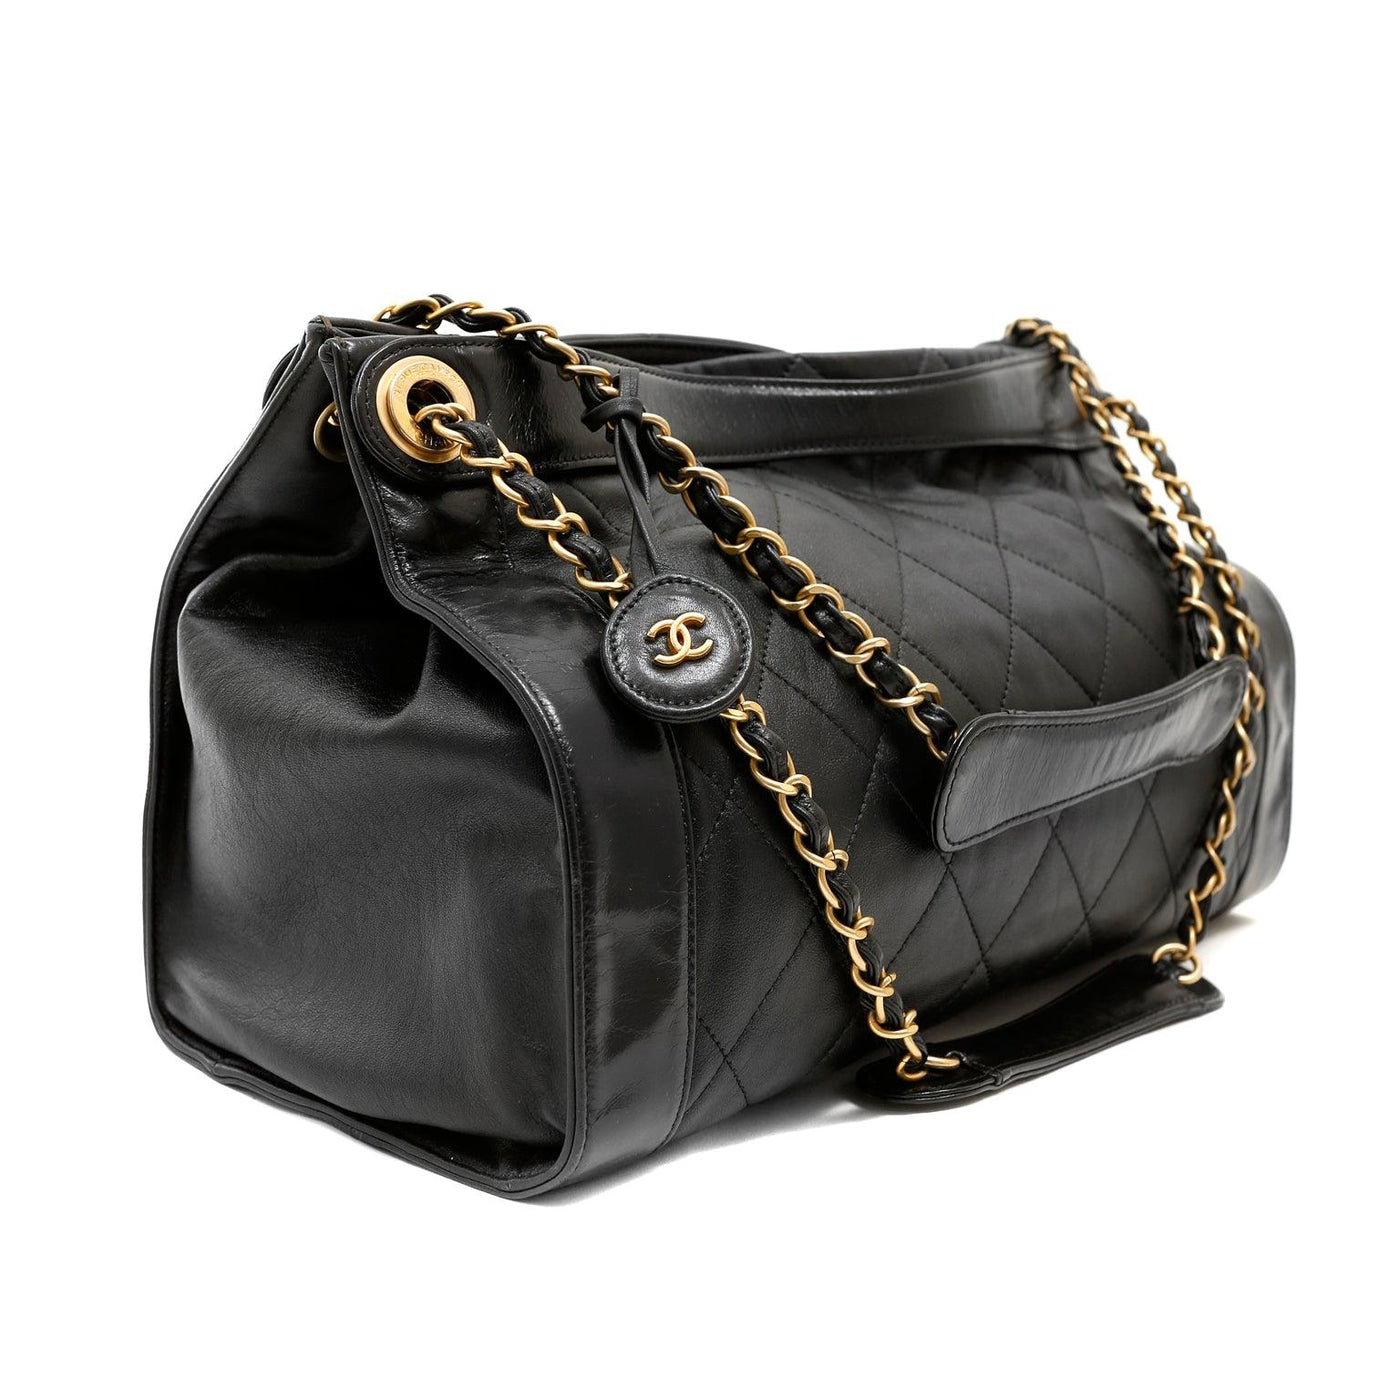 Chanel Black Calfskin Shopper Tote with Gold Hardware - Only Authentics